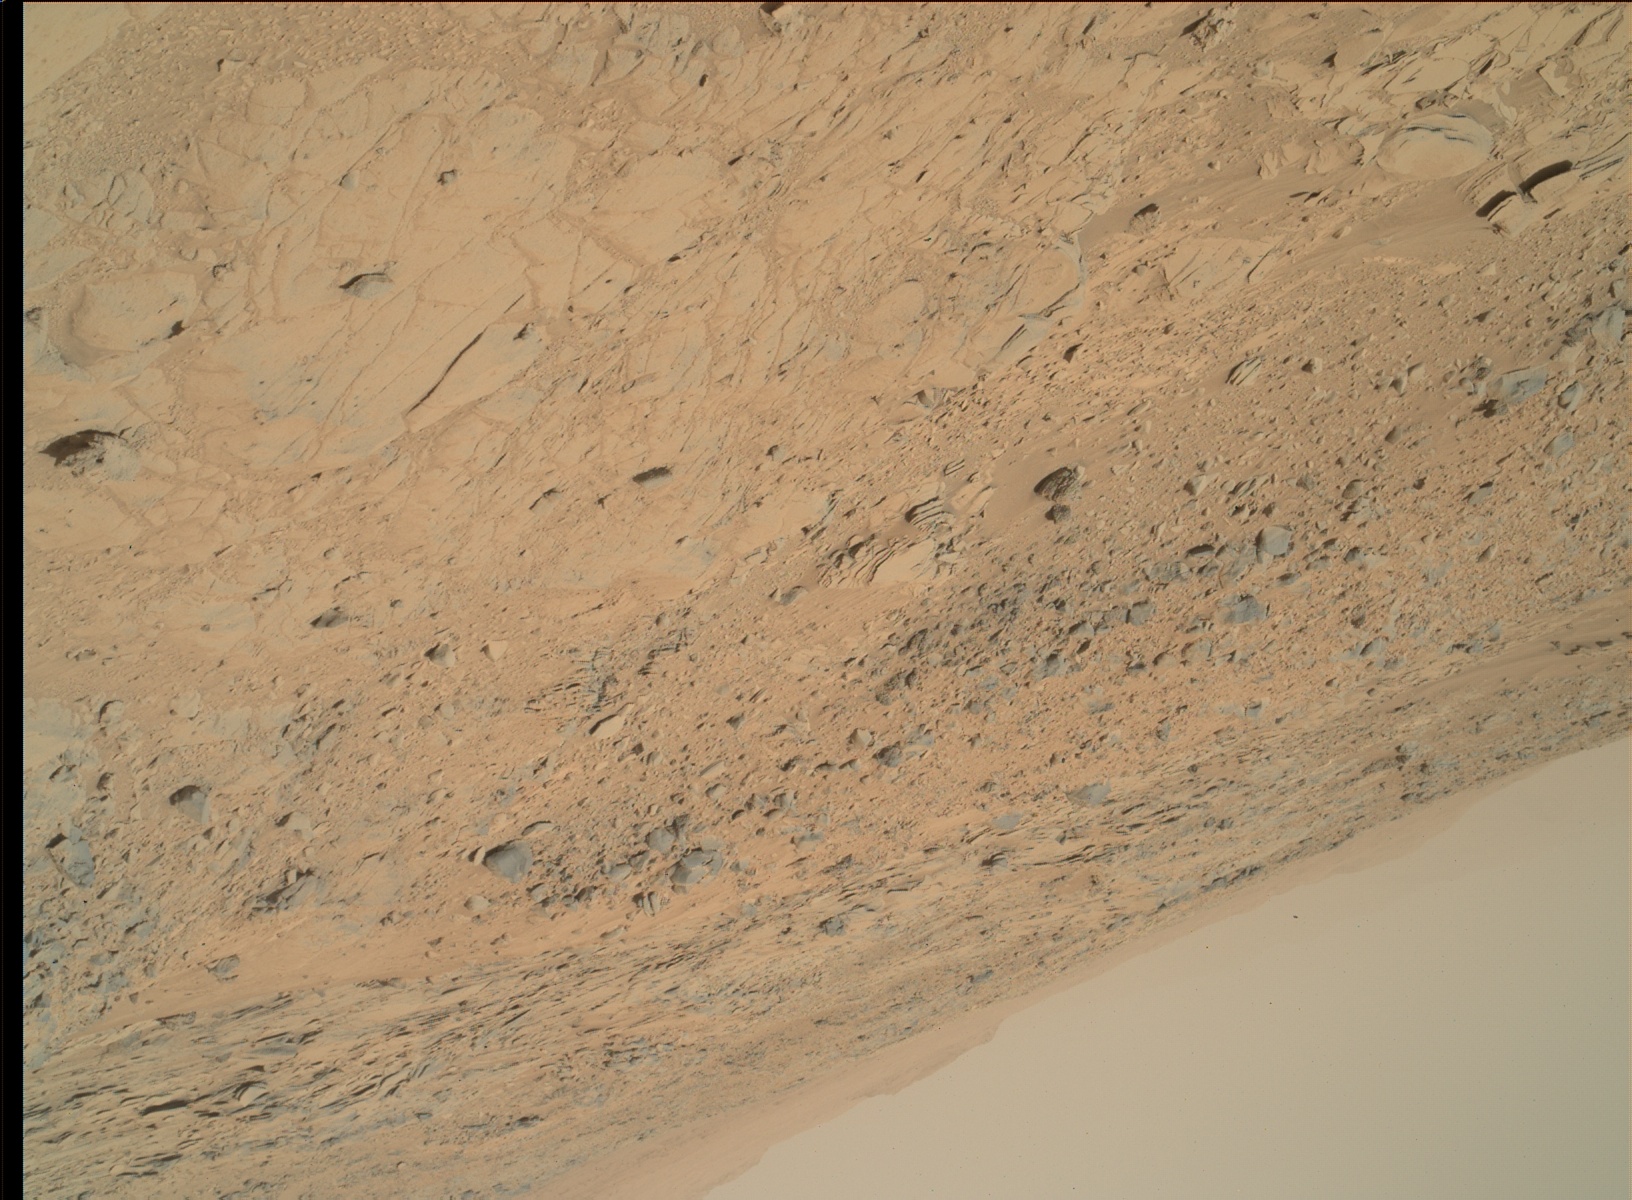 Nasa's Mars rover Curiosity acquired this image using its Mars Hand Lens Imager (MAHLI) on Sol 440